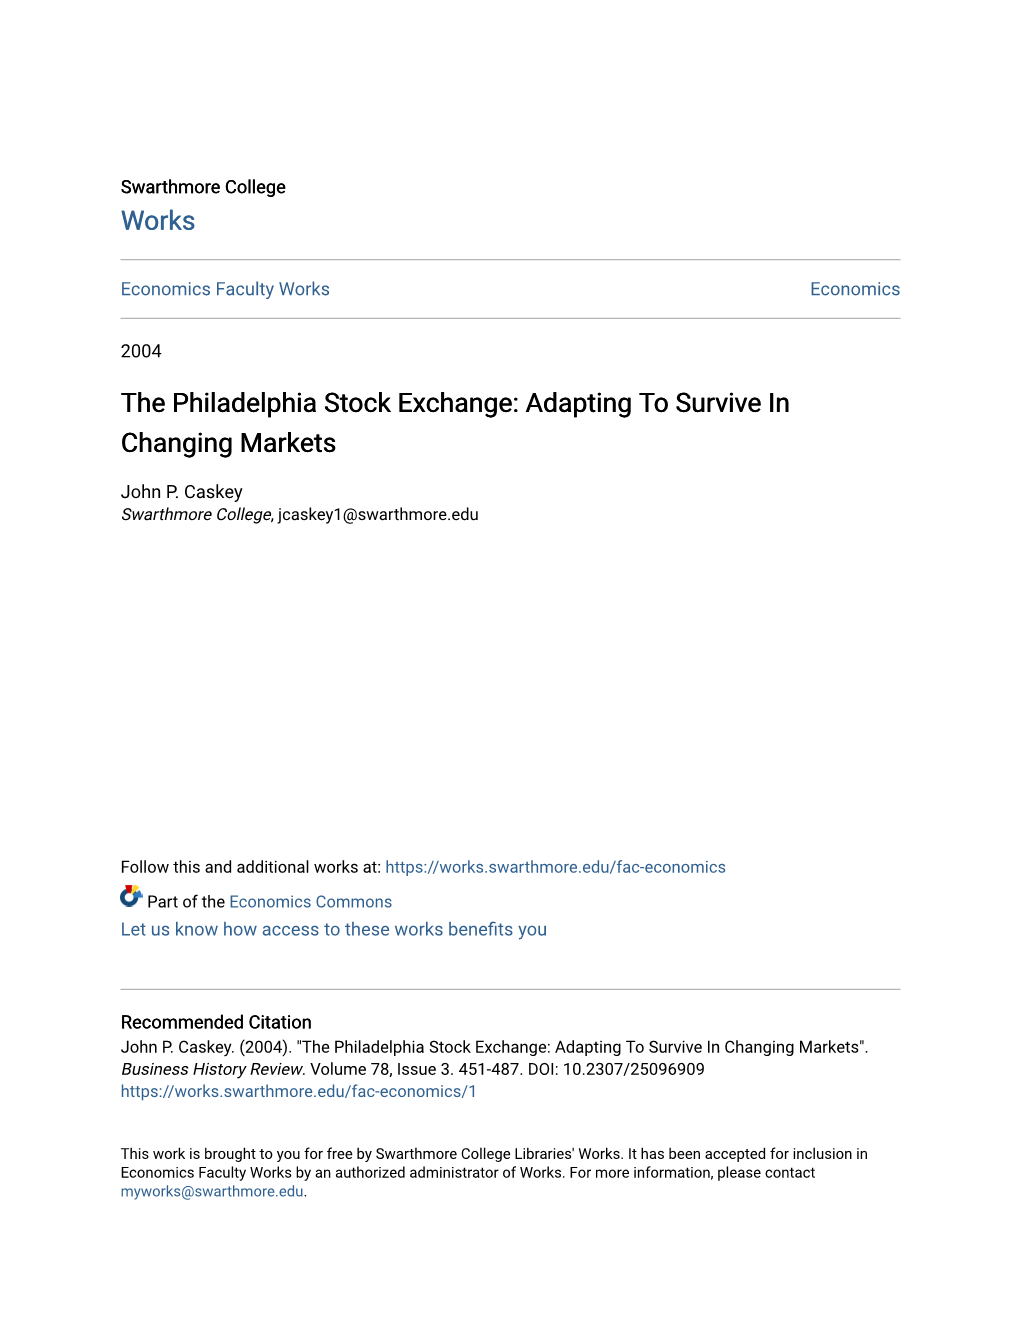 The Philadelphia Stock Exchange: Adapting to Survive in Changing Markets